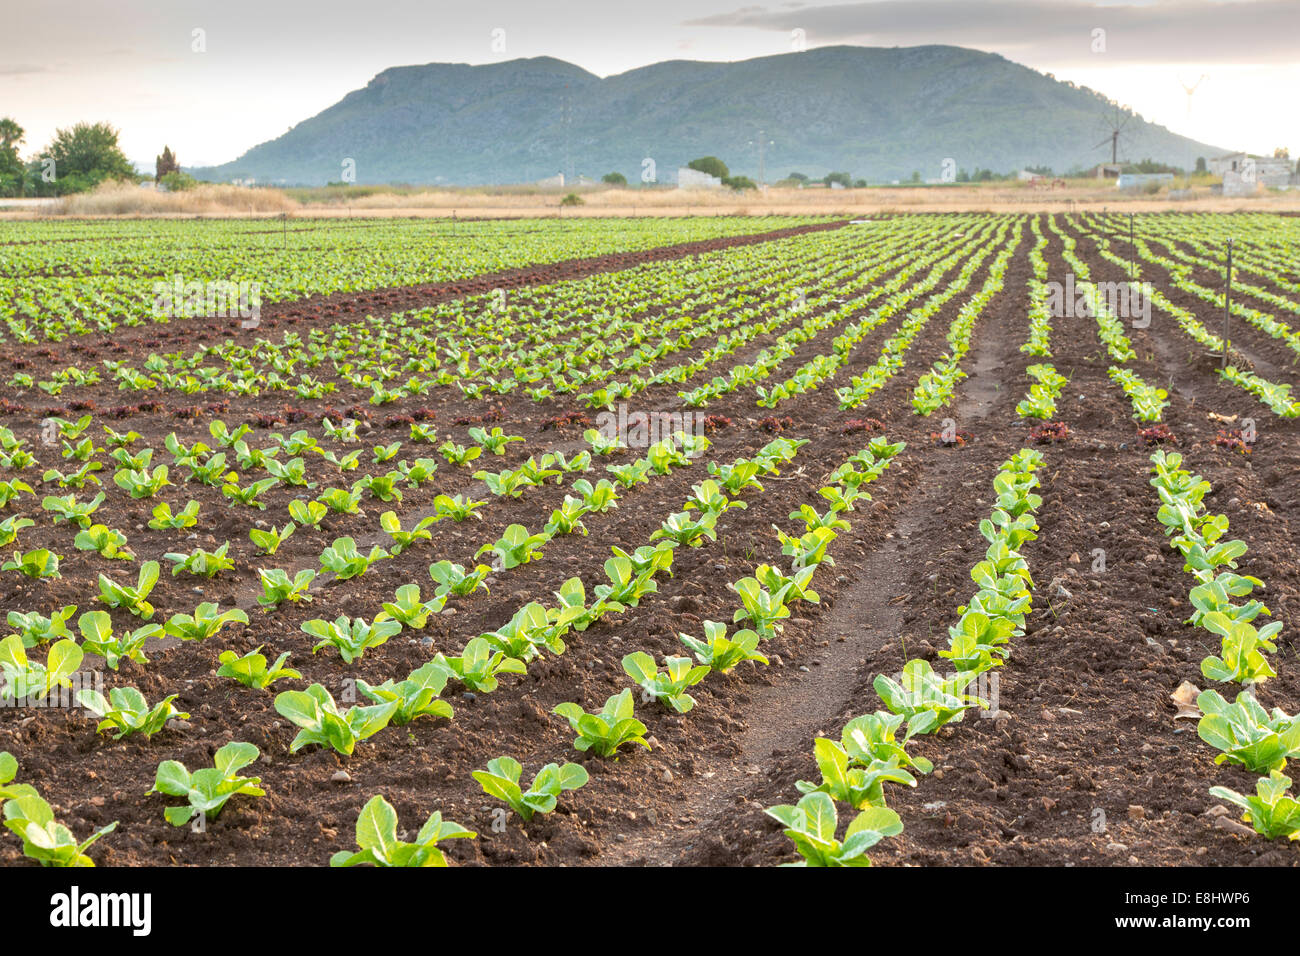 young red and green lettuces growing in field, Es Pla plain, Mallorca, Spain, August. Stock Photo